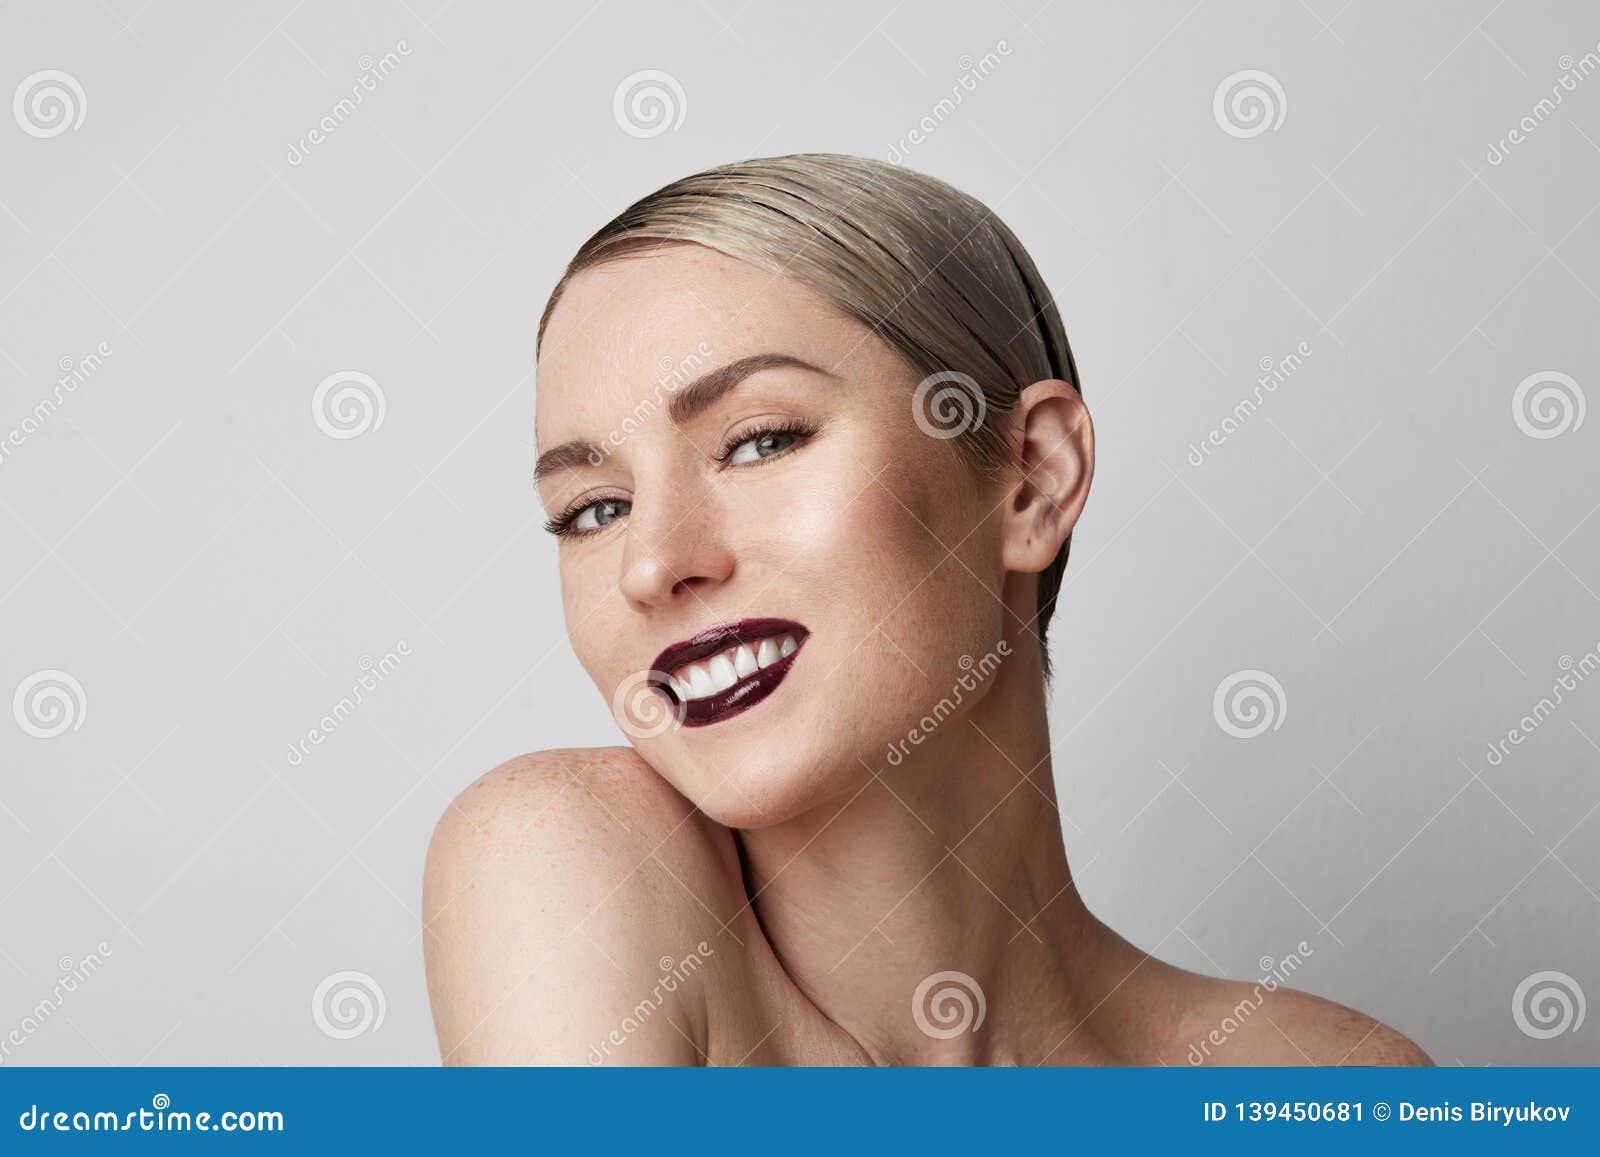 Frowning Nude Blonde Posing Stock Photo - Image of model 